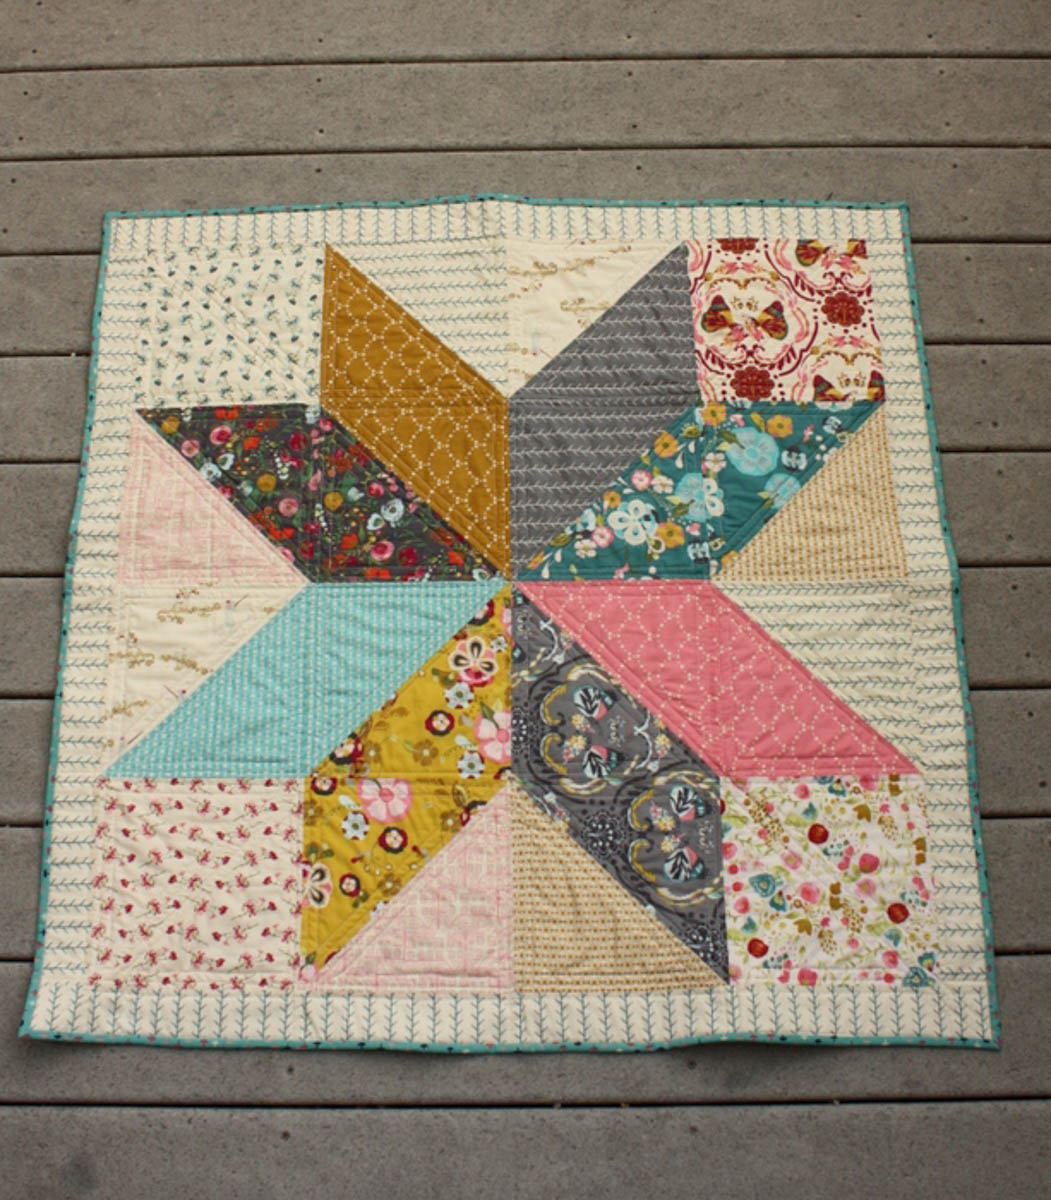 Lone Star Baby Quilt Quilt-Along Part II Finished Quilt